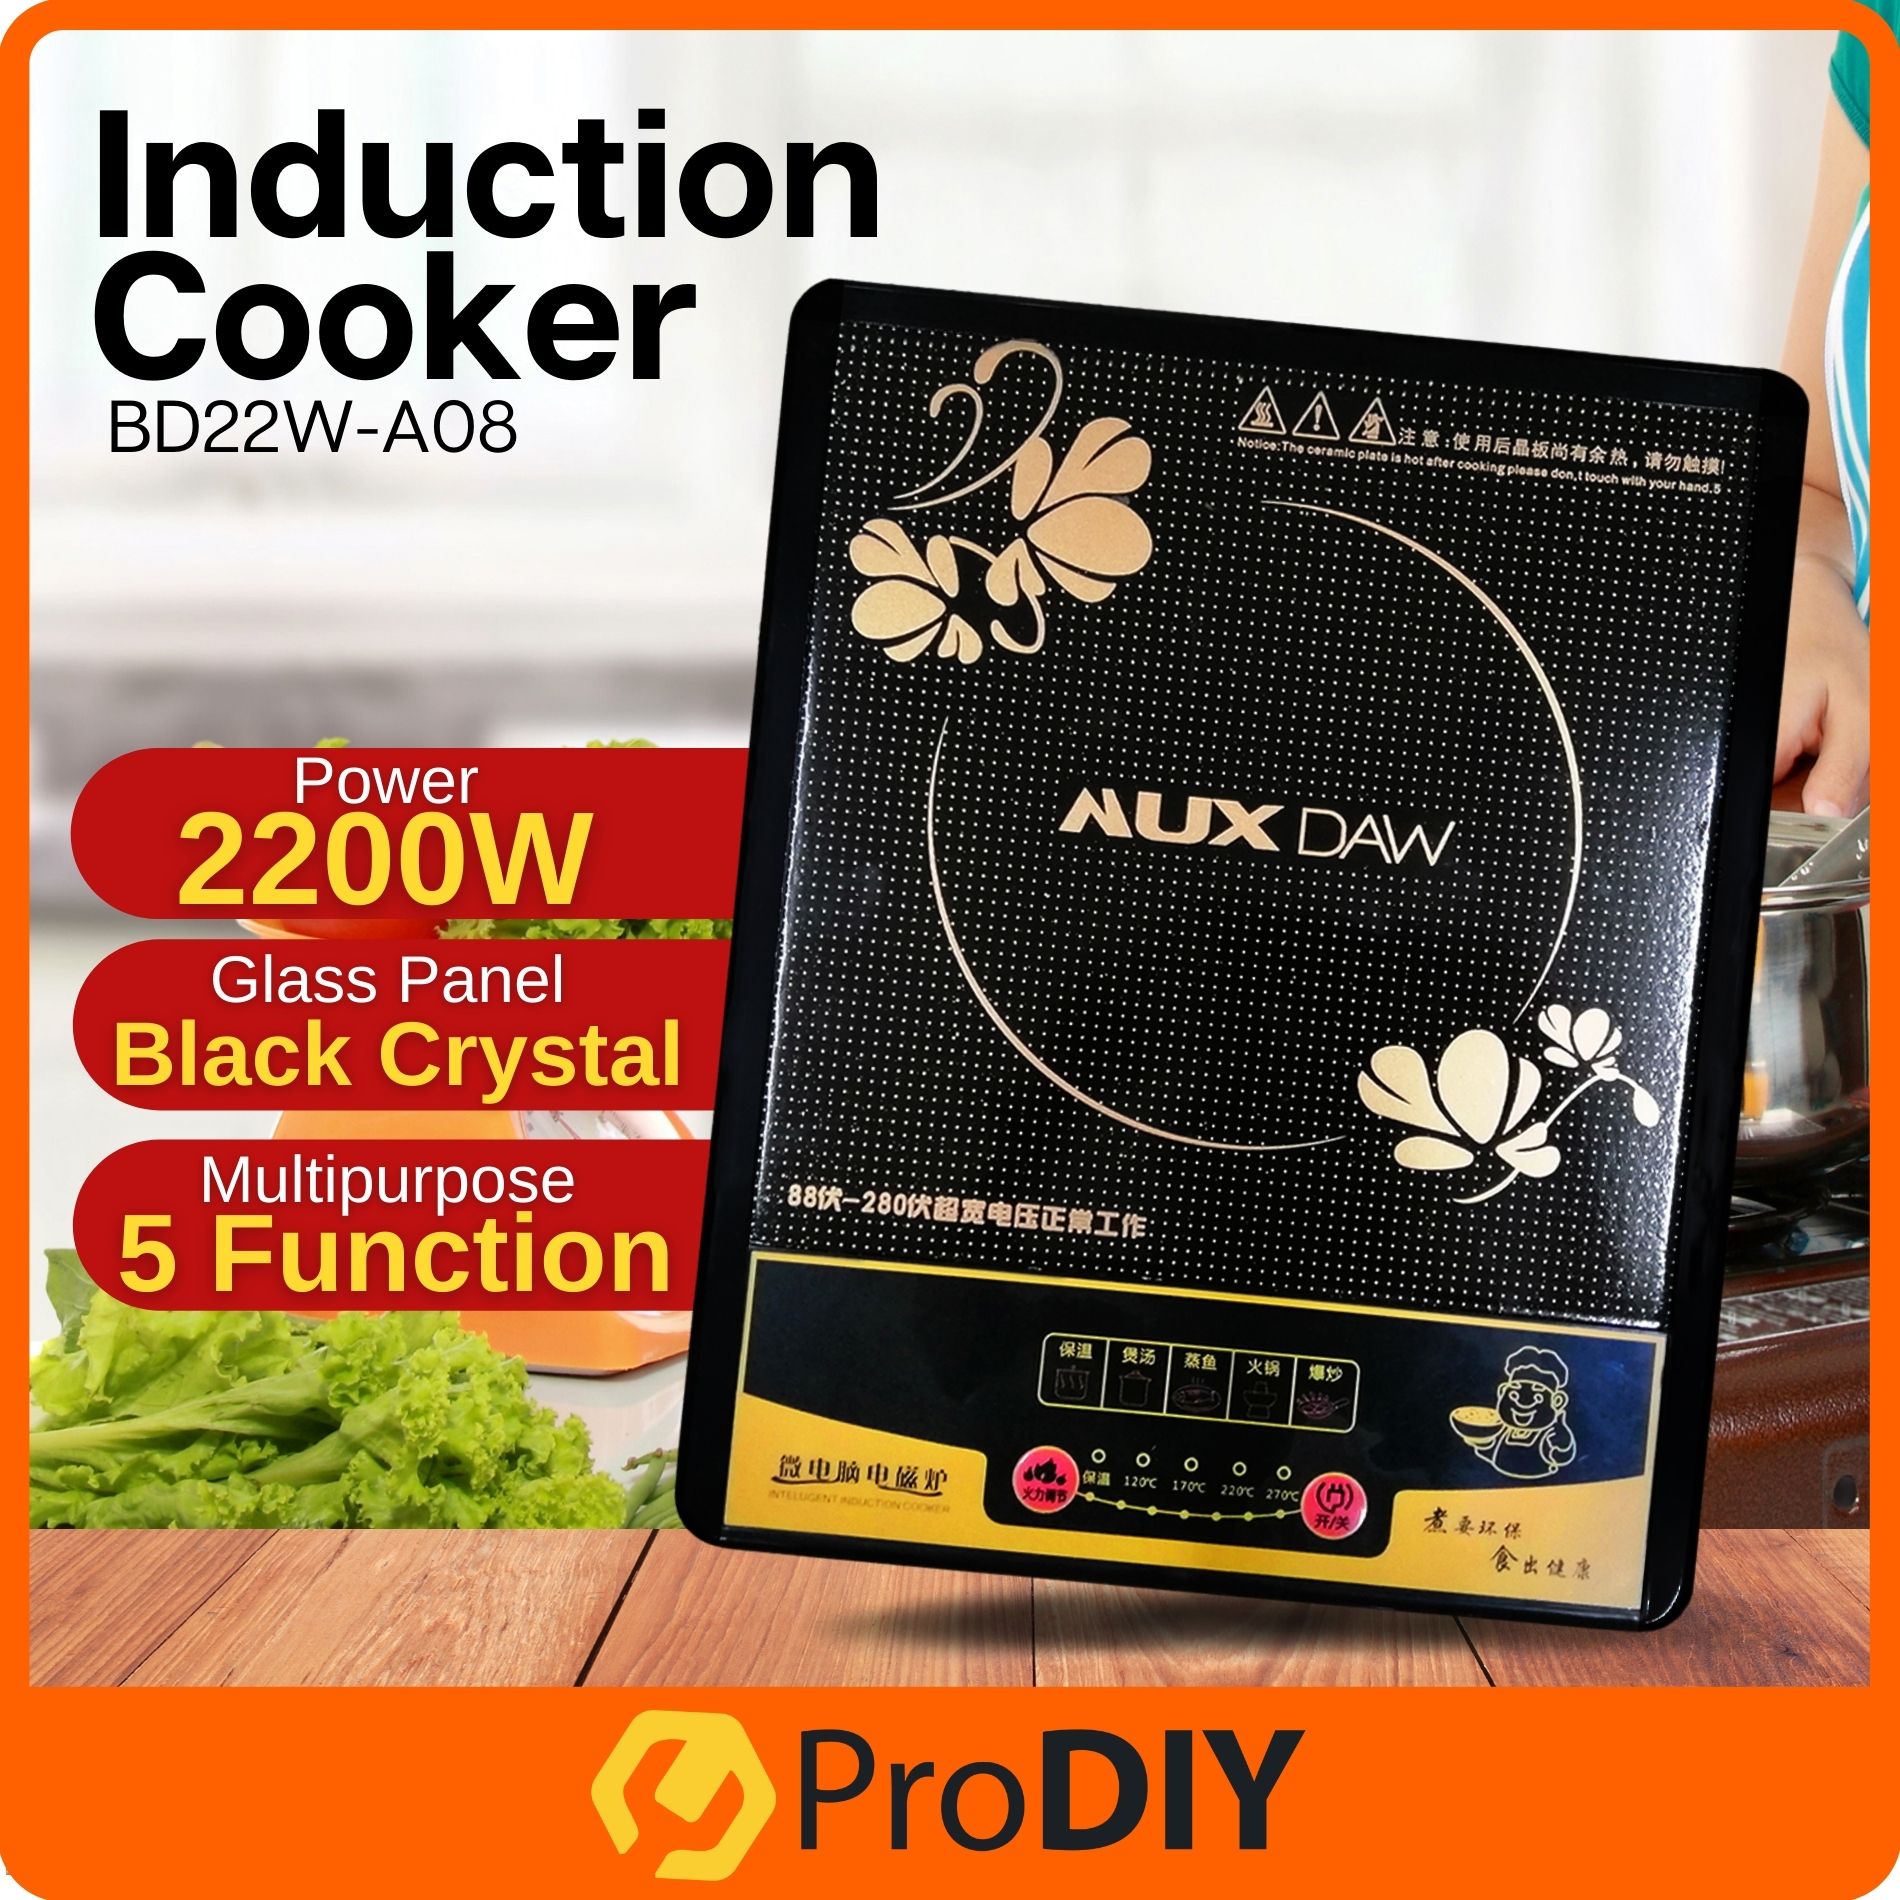 AUXDAW 2200W Induction Cooker Electric Stove Portable Cooktop Black Touch Button 5 Funtion Dapur Memasak ( BD22W-A08 )